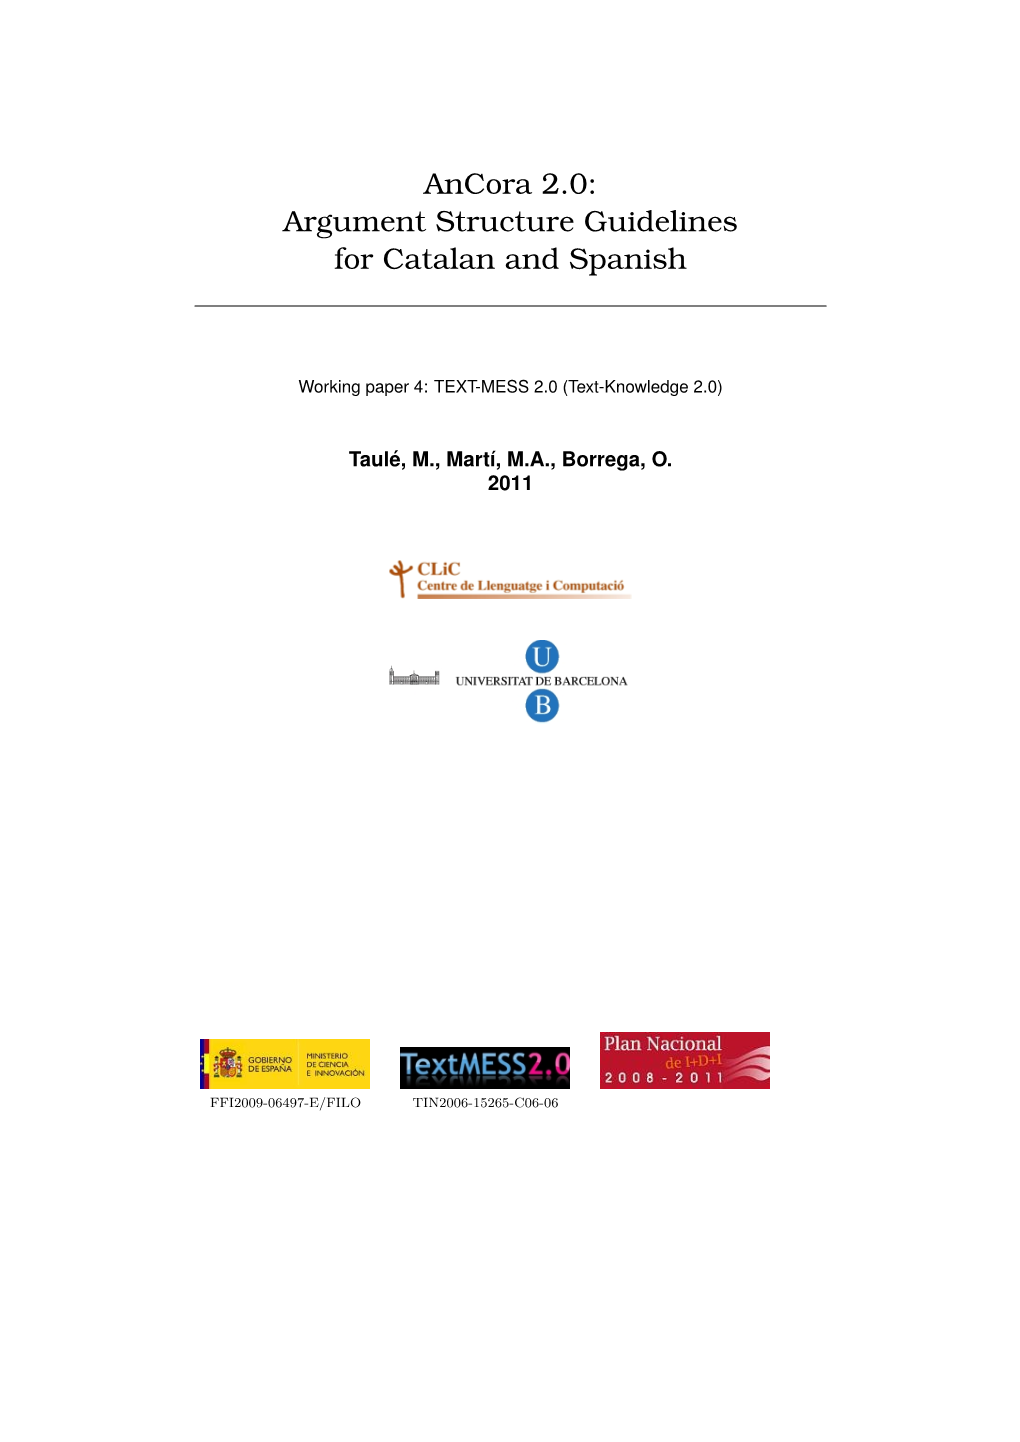 Argument Structure Guidelines for Catalan and Spanish